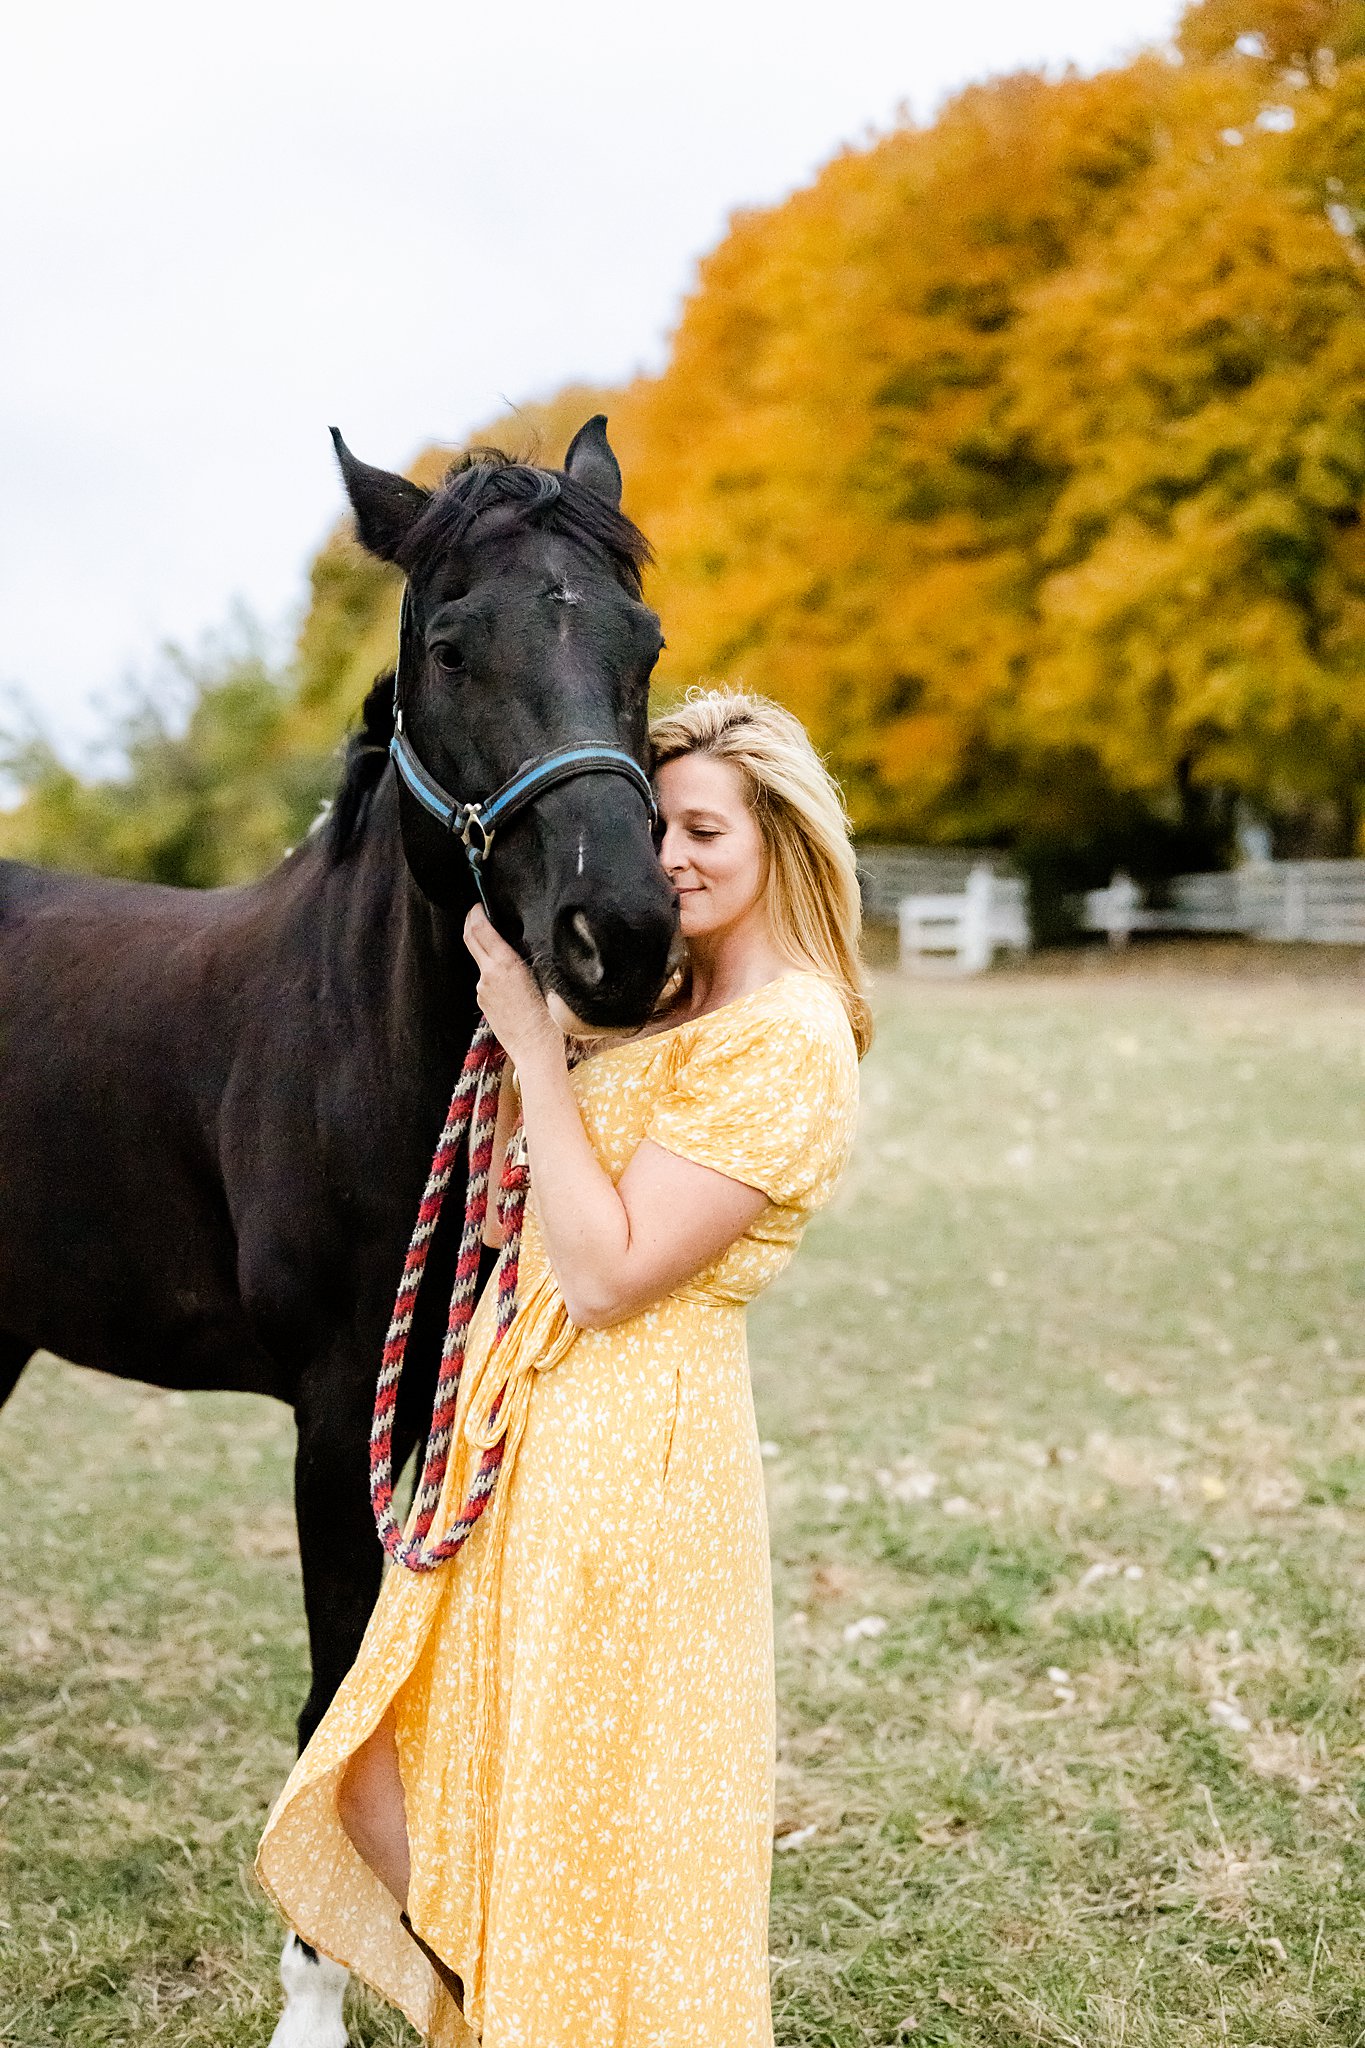 Women in yellow flower sundress nuzzles her face against horse's nose in open pasture Horseback Riding Chicago